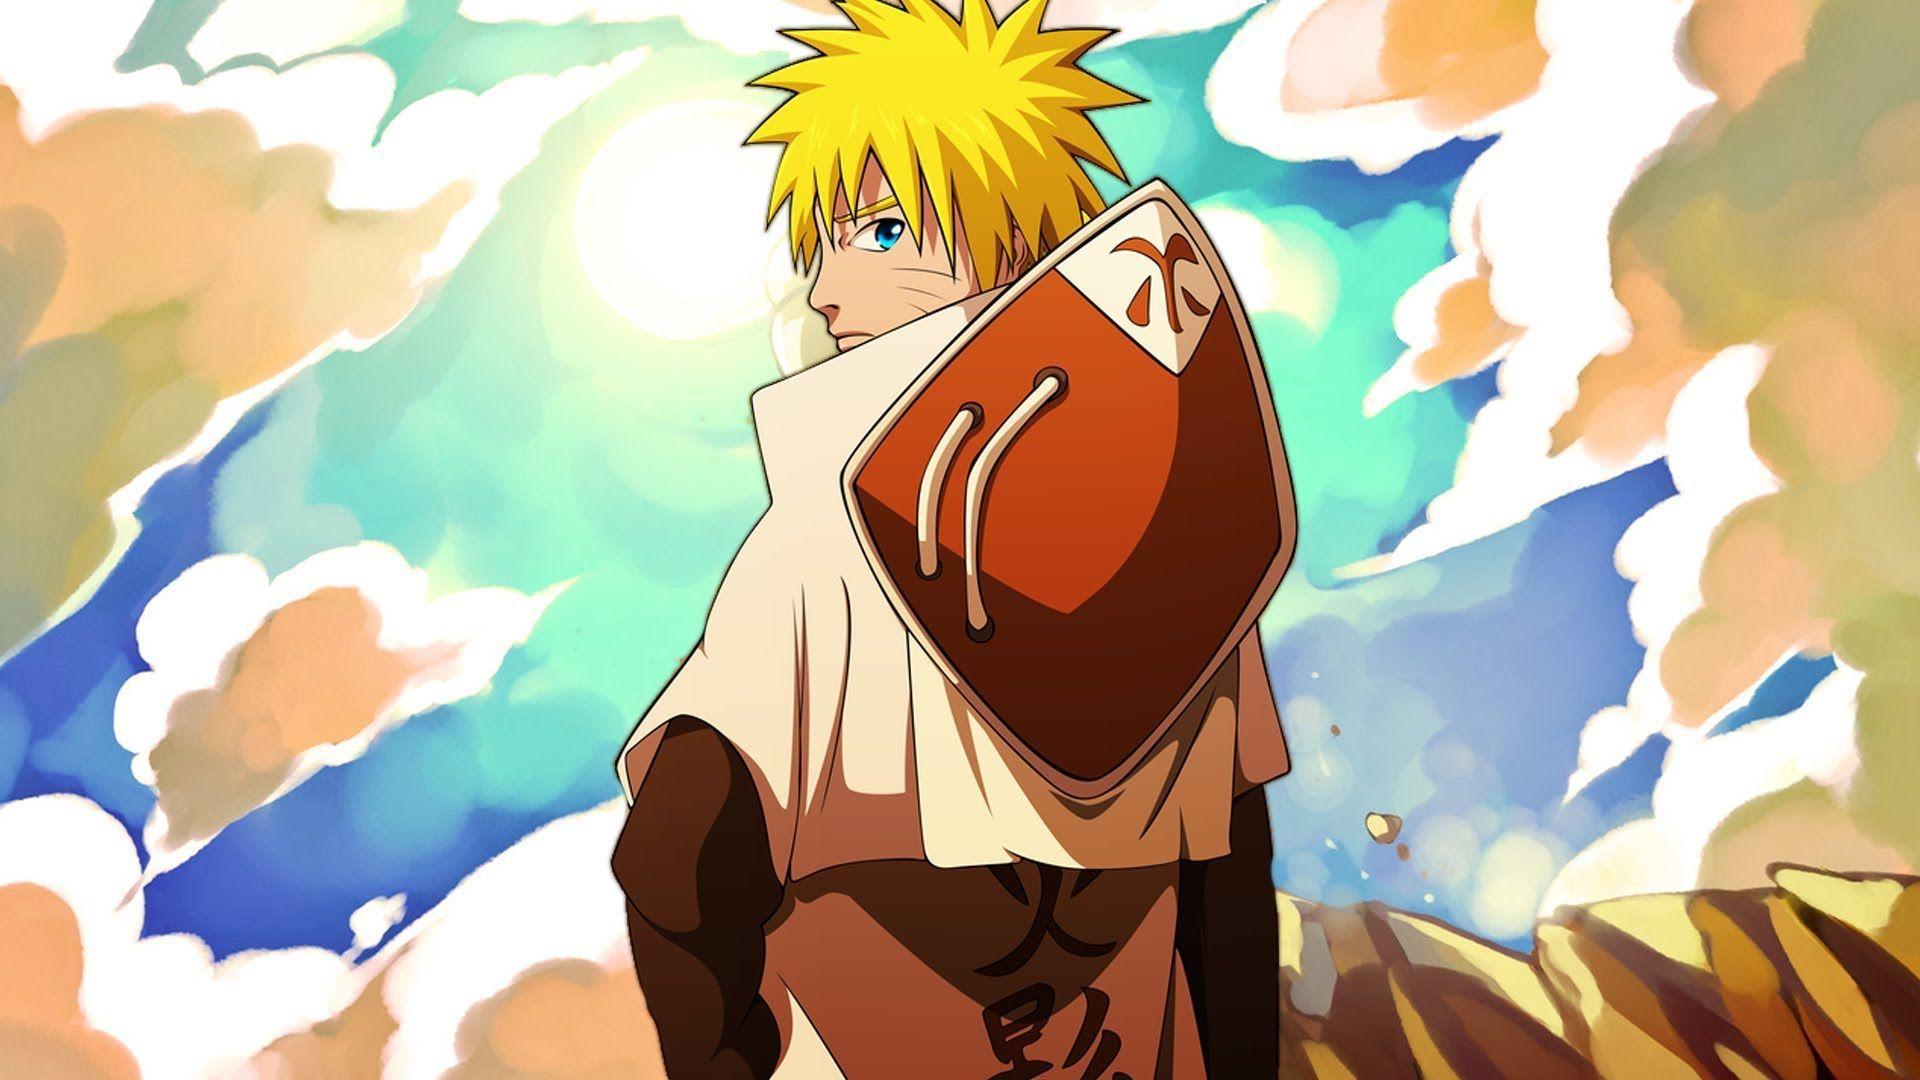 Cool Wallpaper Anime Naruto : Cool Naruto Backgrounds - Wallpaper Cave